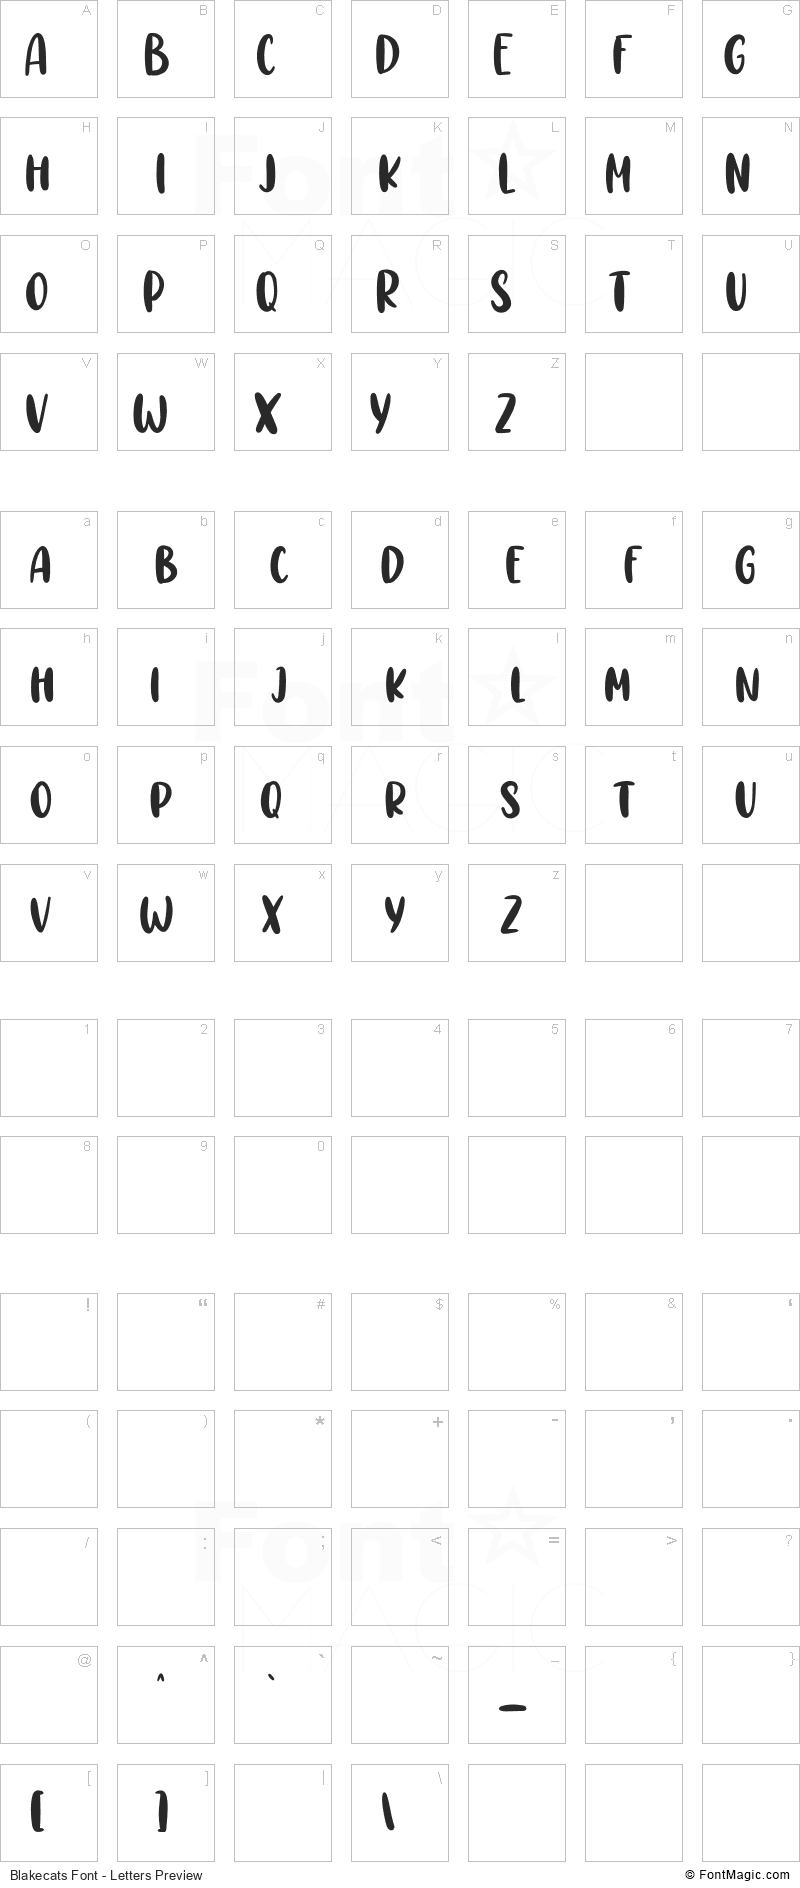 Blakecats Font - All Latters Preview Chart